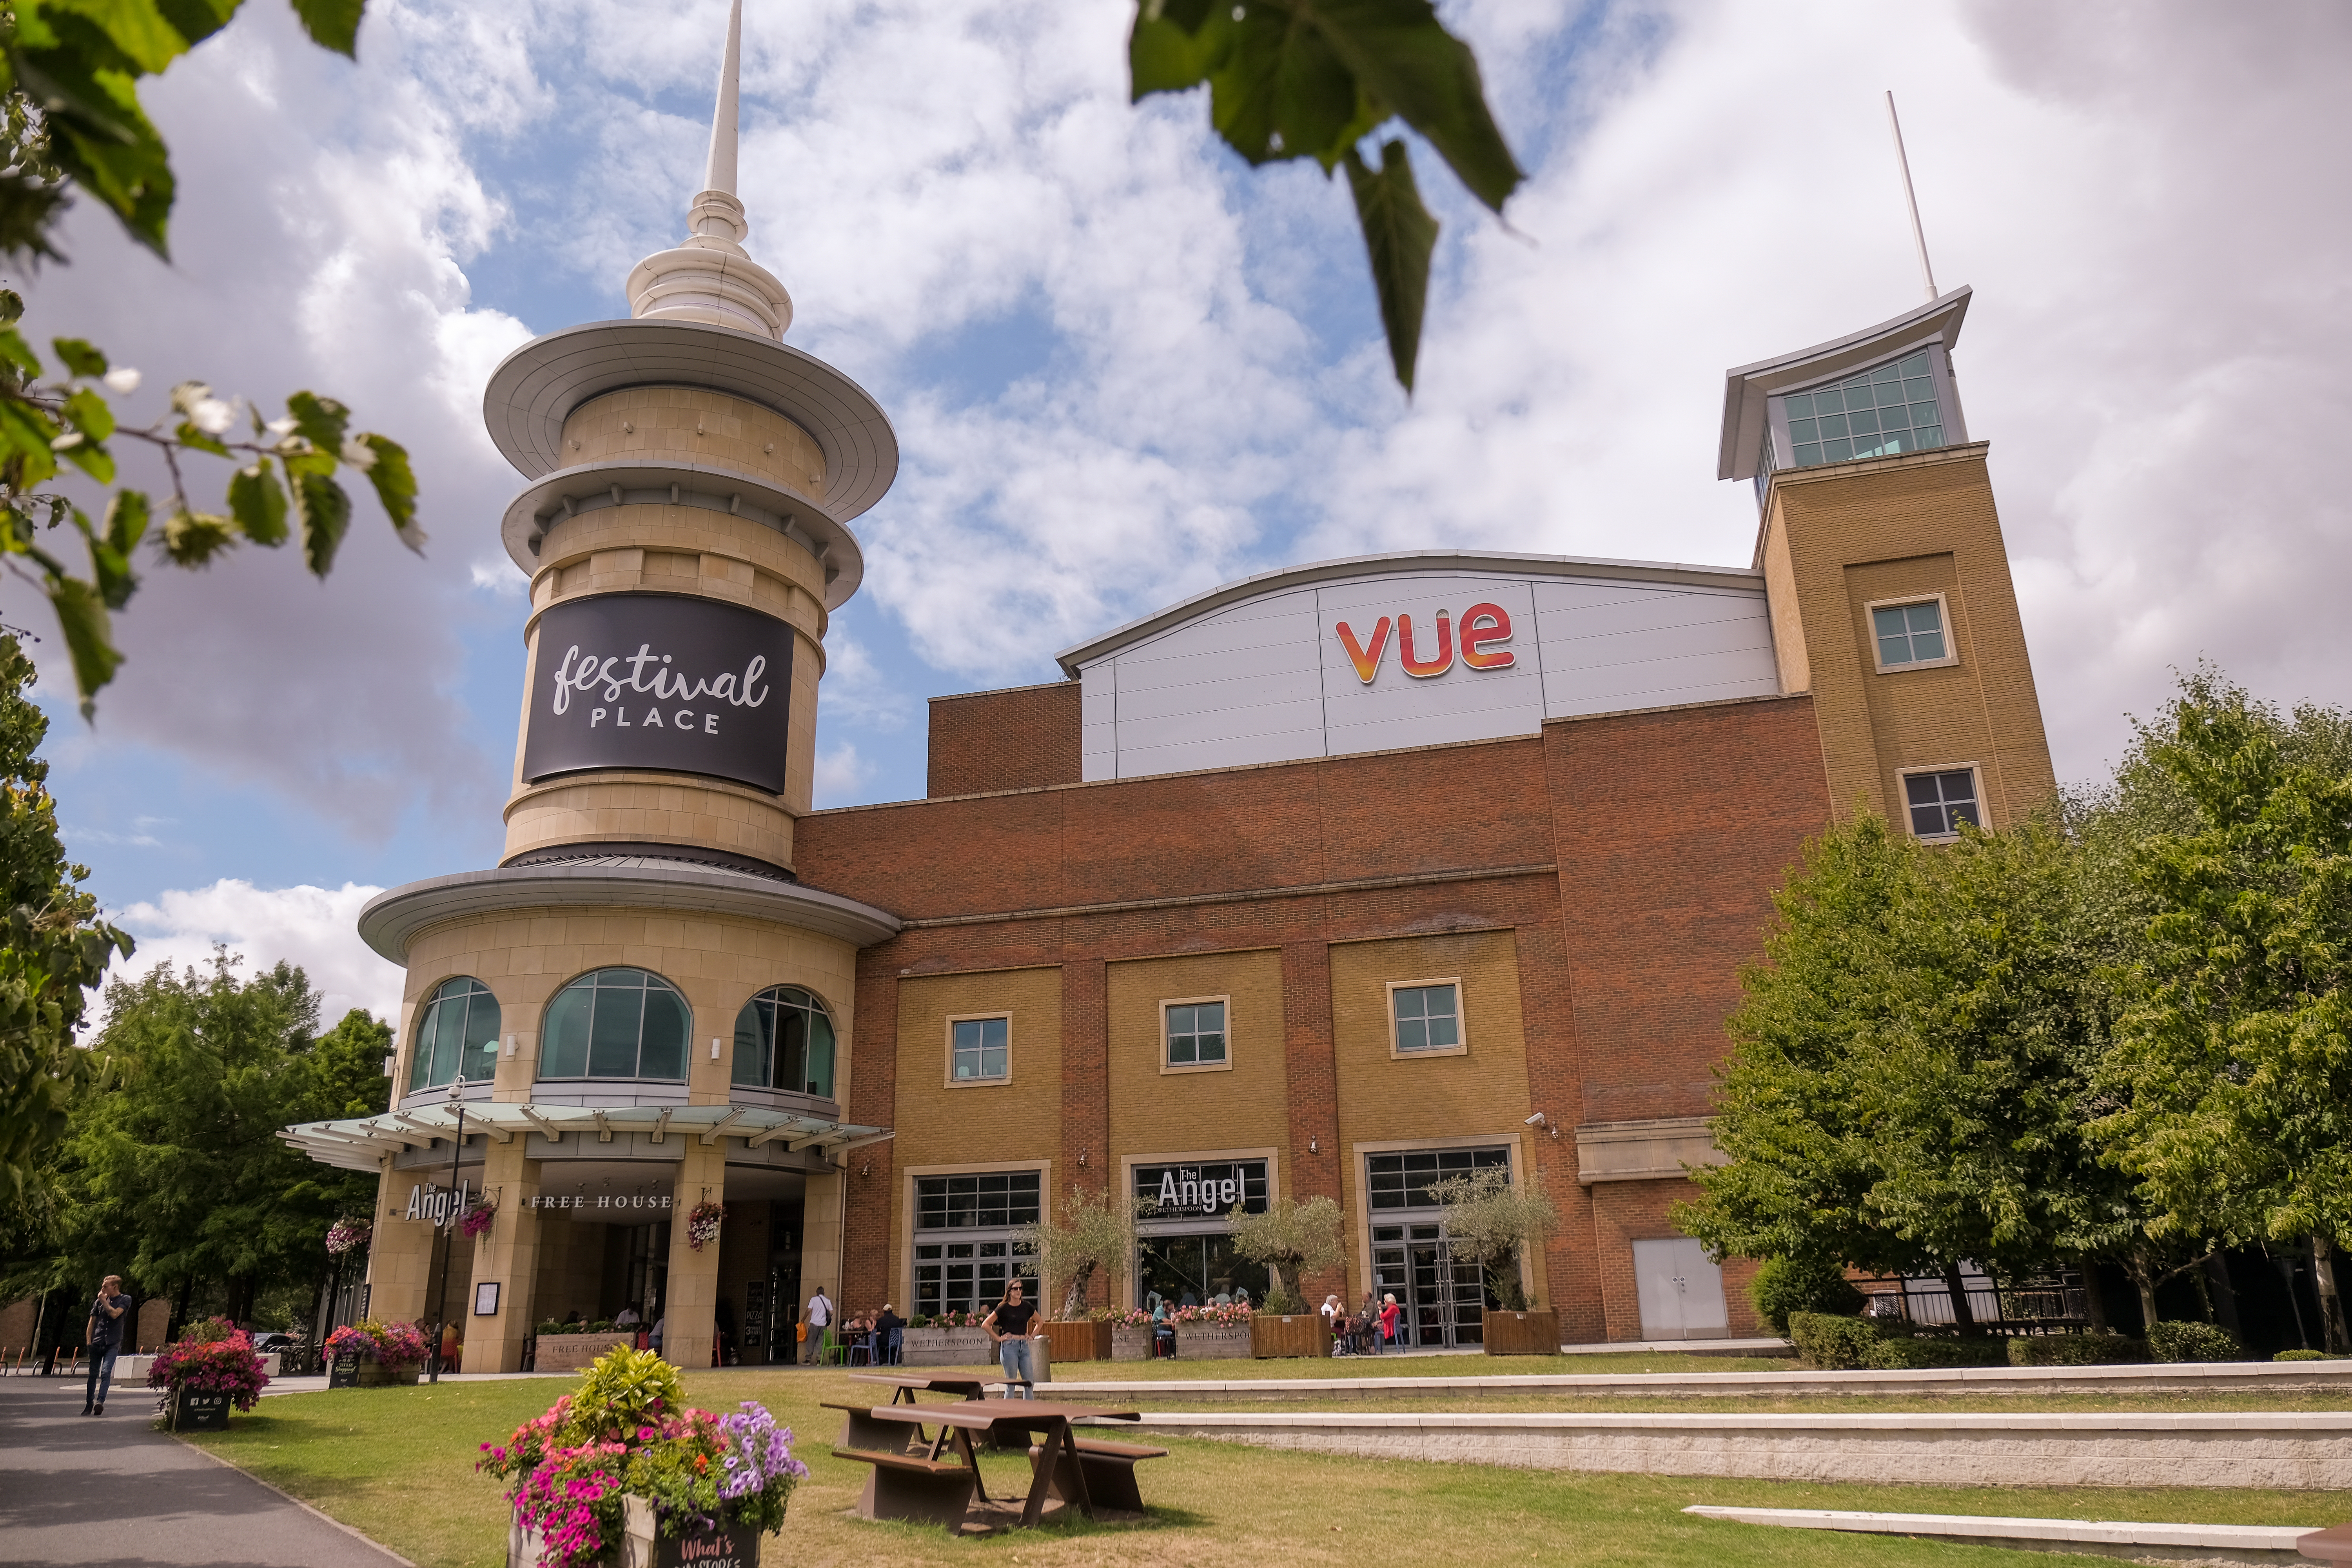 The brick building houses Vue Cinema, The Angel pub and has a turret for Festival Place. Outside you can see a small part of the amphitheatre and some benches.